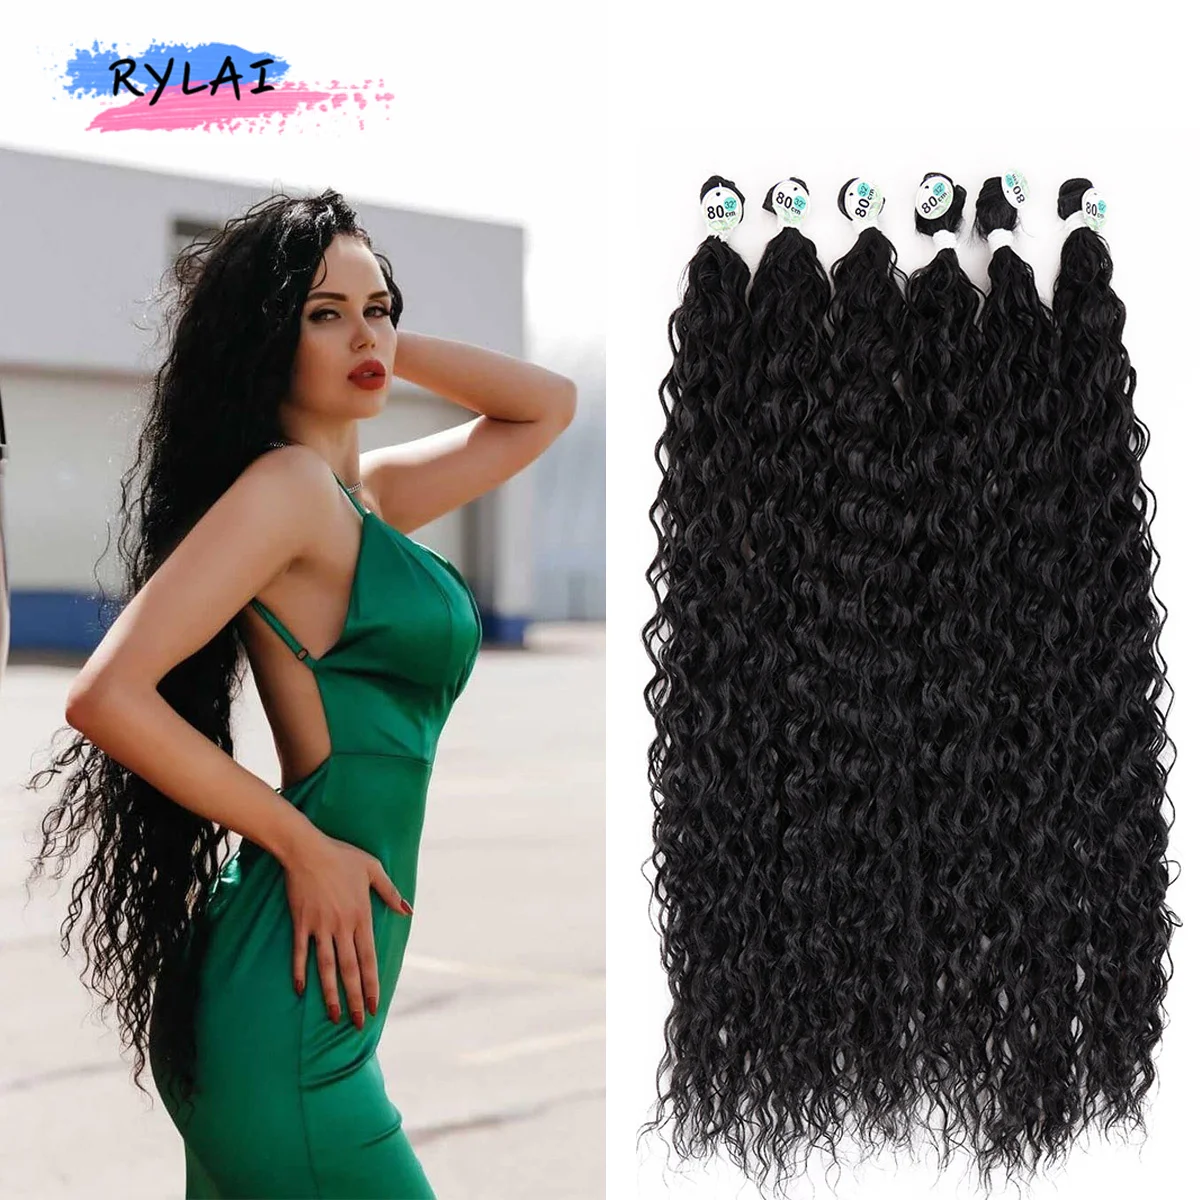 

Synthetic Hair Bundles Afro Curls Kinky Curly Weaving Braid Extension 300g/9Pcs Full Head 26-32" Blond Brown RYLAI INS ANJO PLUS